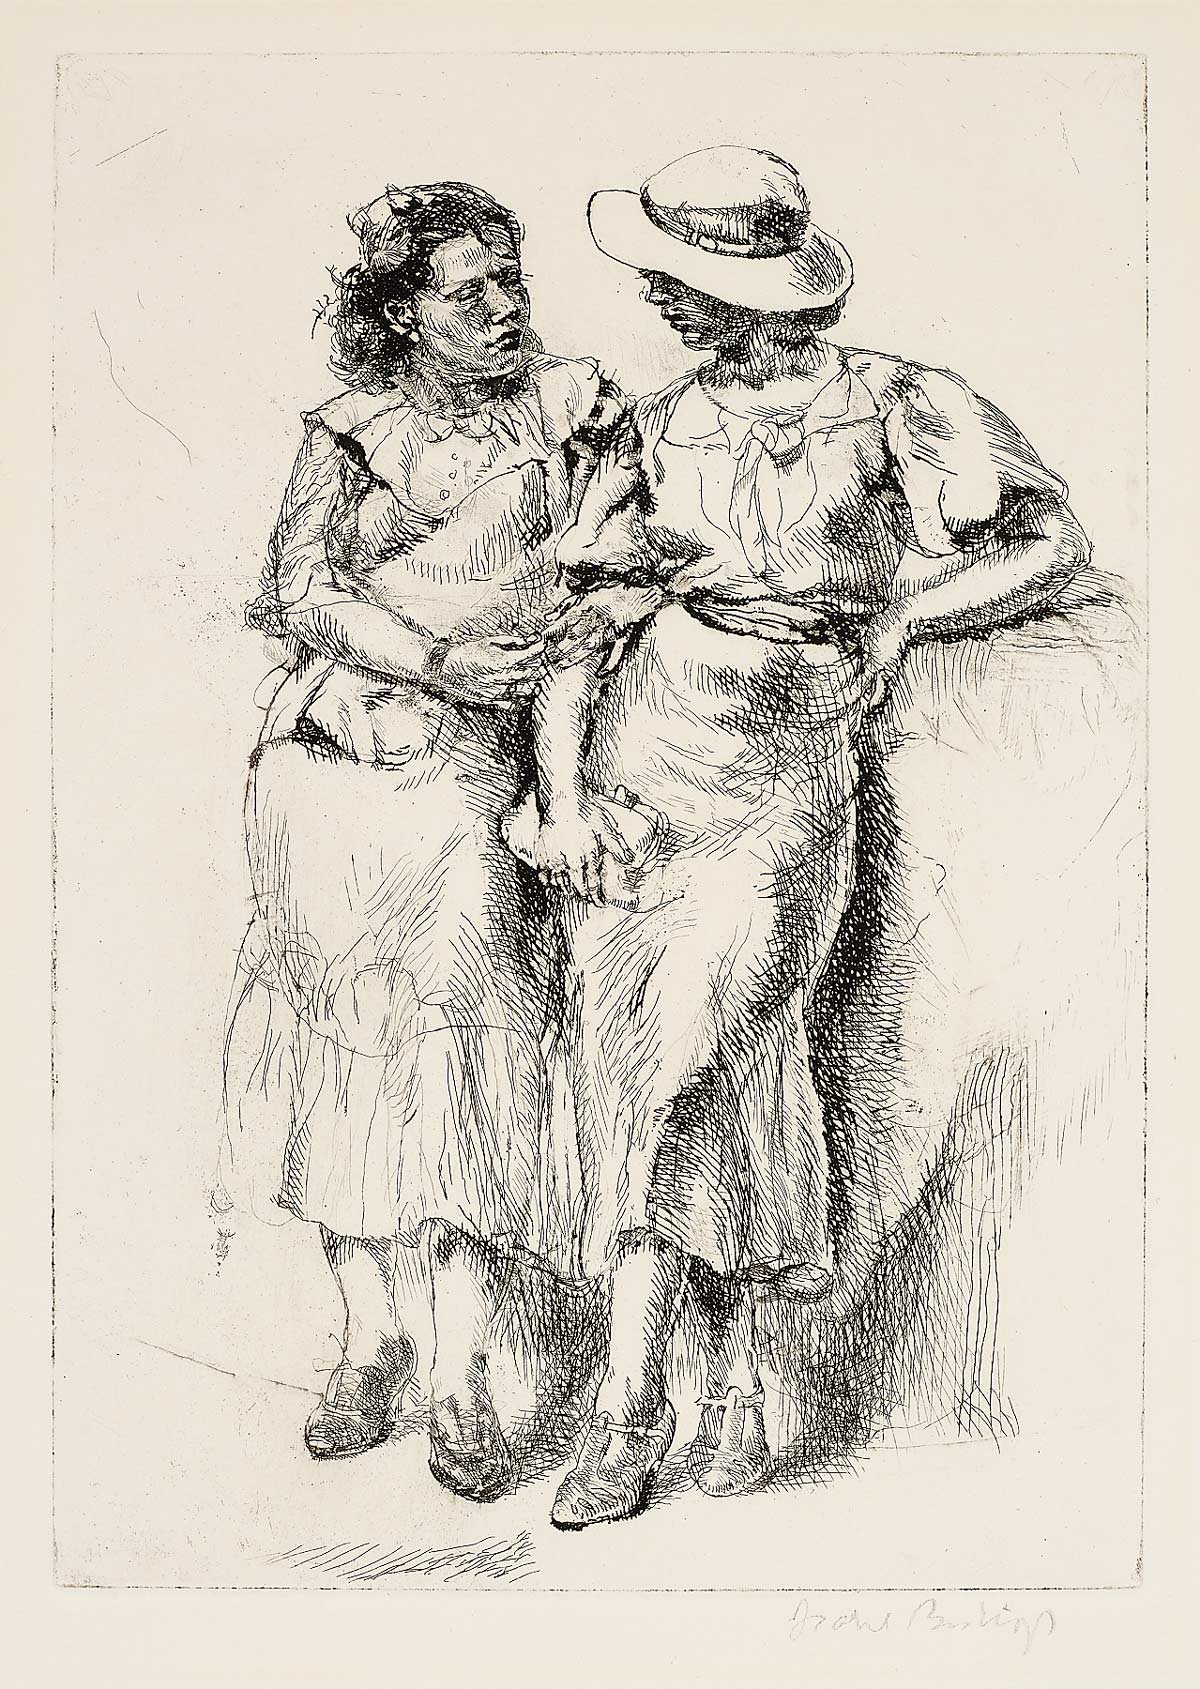 Sketch of two women linking arms and looking at each other